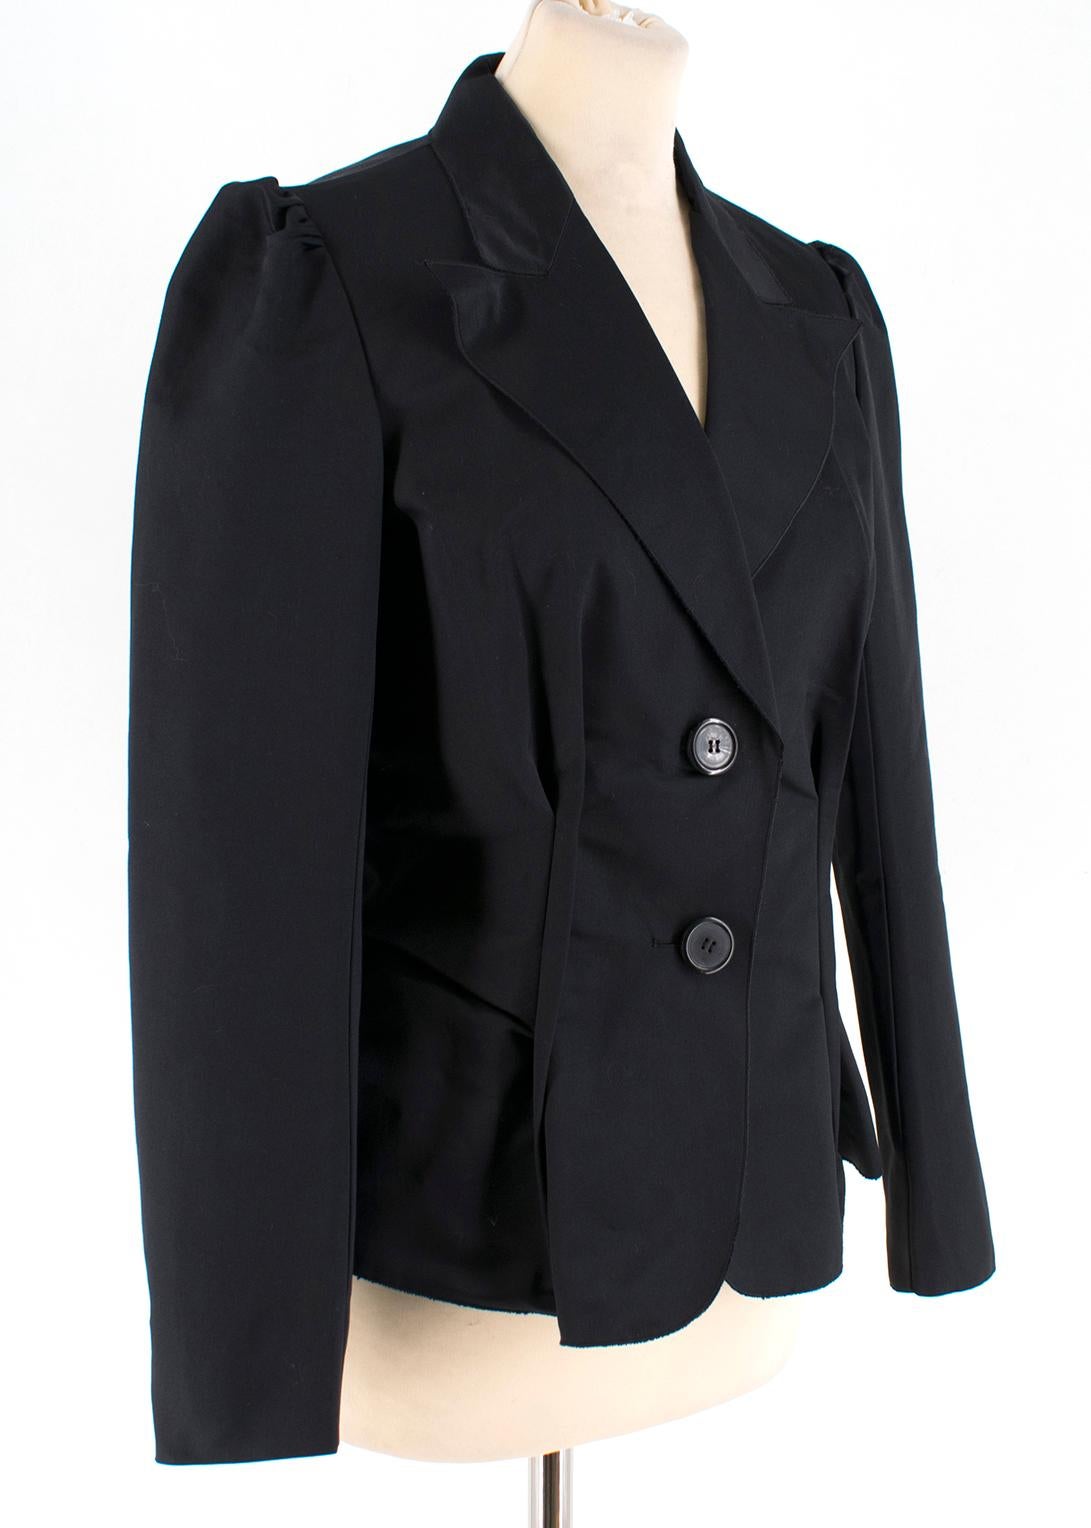 Lanvin Black Silk Blend Fitted Blazer

single breasted two button peak lapel;
lining 100% silk;
structured silhouette;
Made in France

Please note, these items are pre-owned and may show signs of
being stored even when unworn and unused. This is